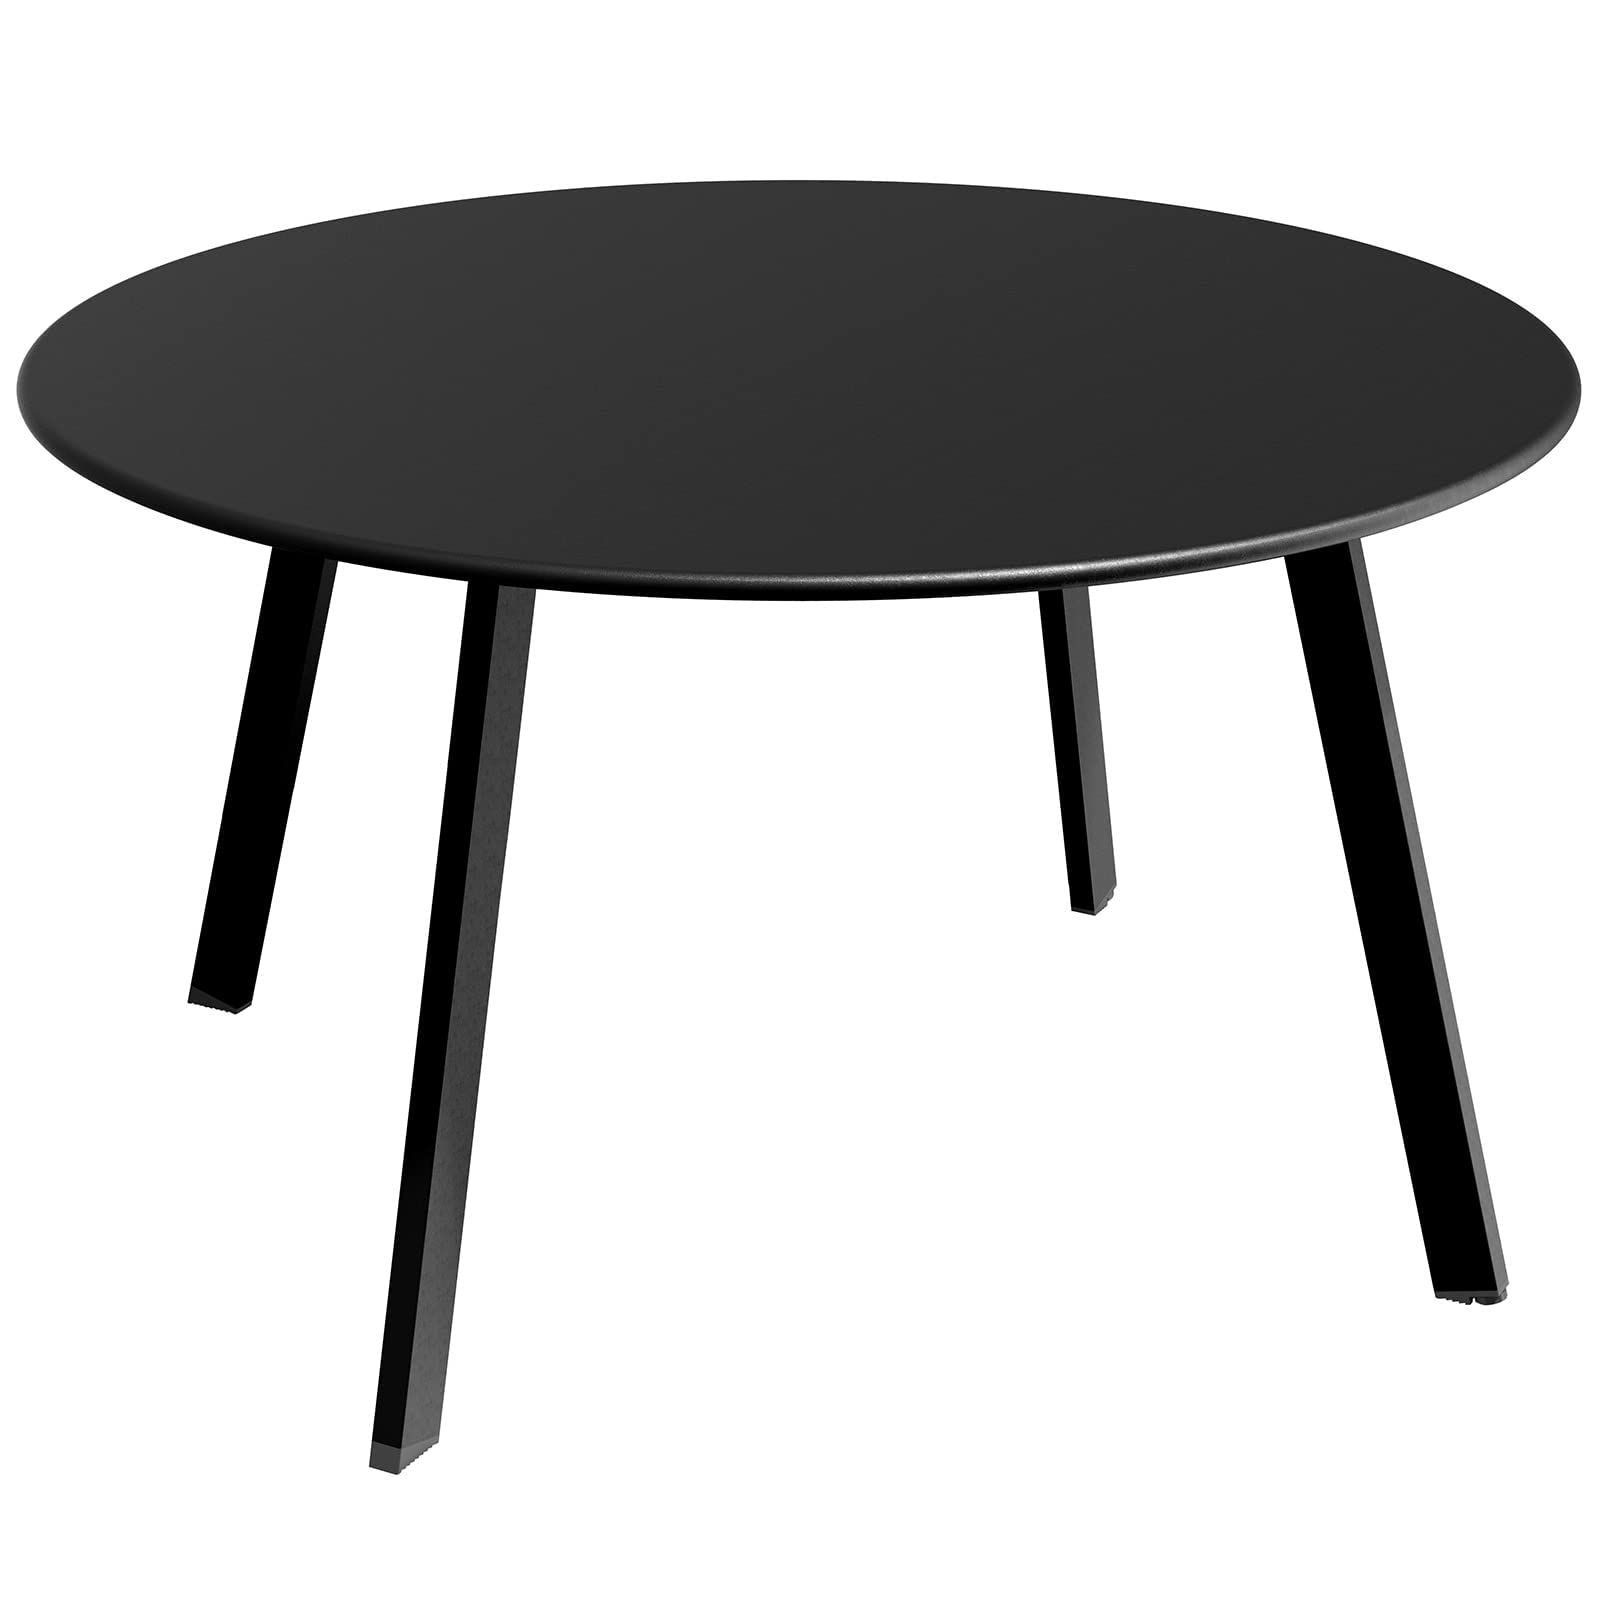 Round Steel Patio Coffee Tables In Most Recently Released Amazon: Grand Patio Round Steel Patio Coffee Table, Weather Resistant  Outdoor Large Side Table,( Black, 1 Pc) : Patio, Lawn & Garden (View 2 of 10)